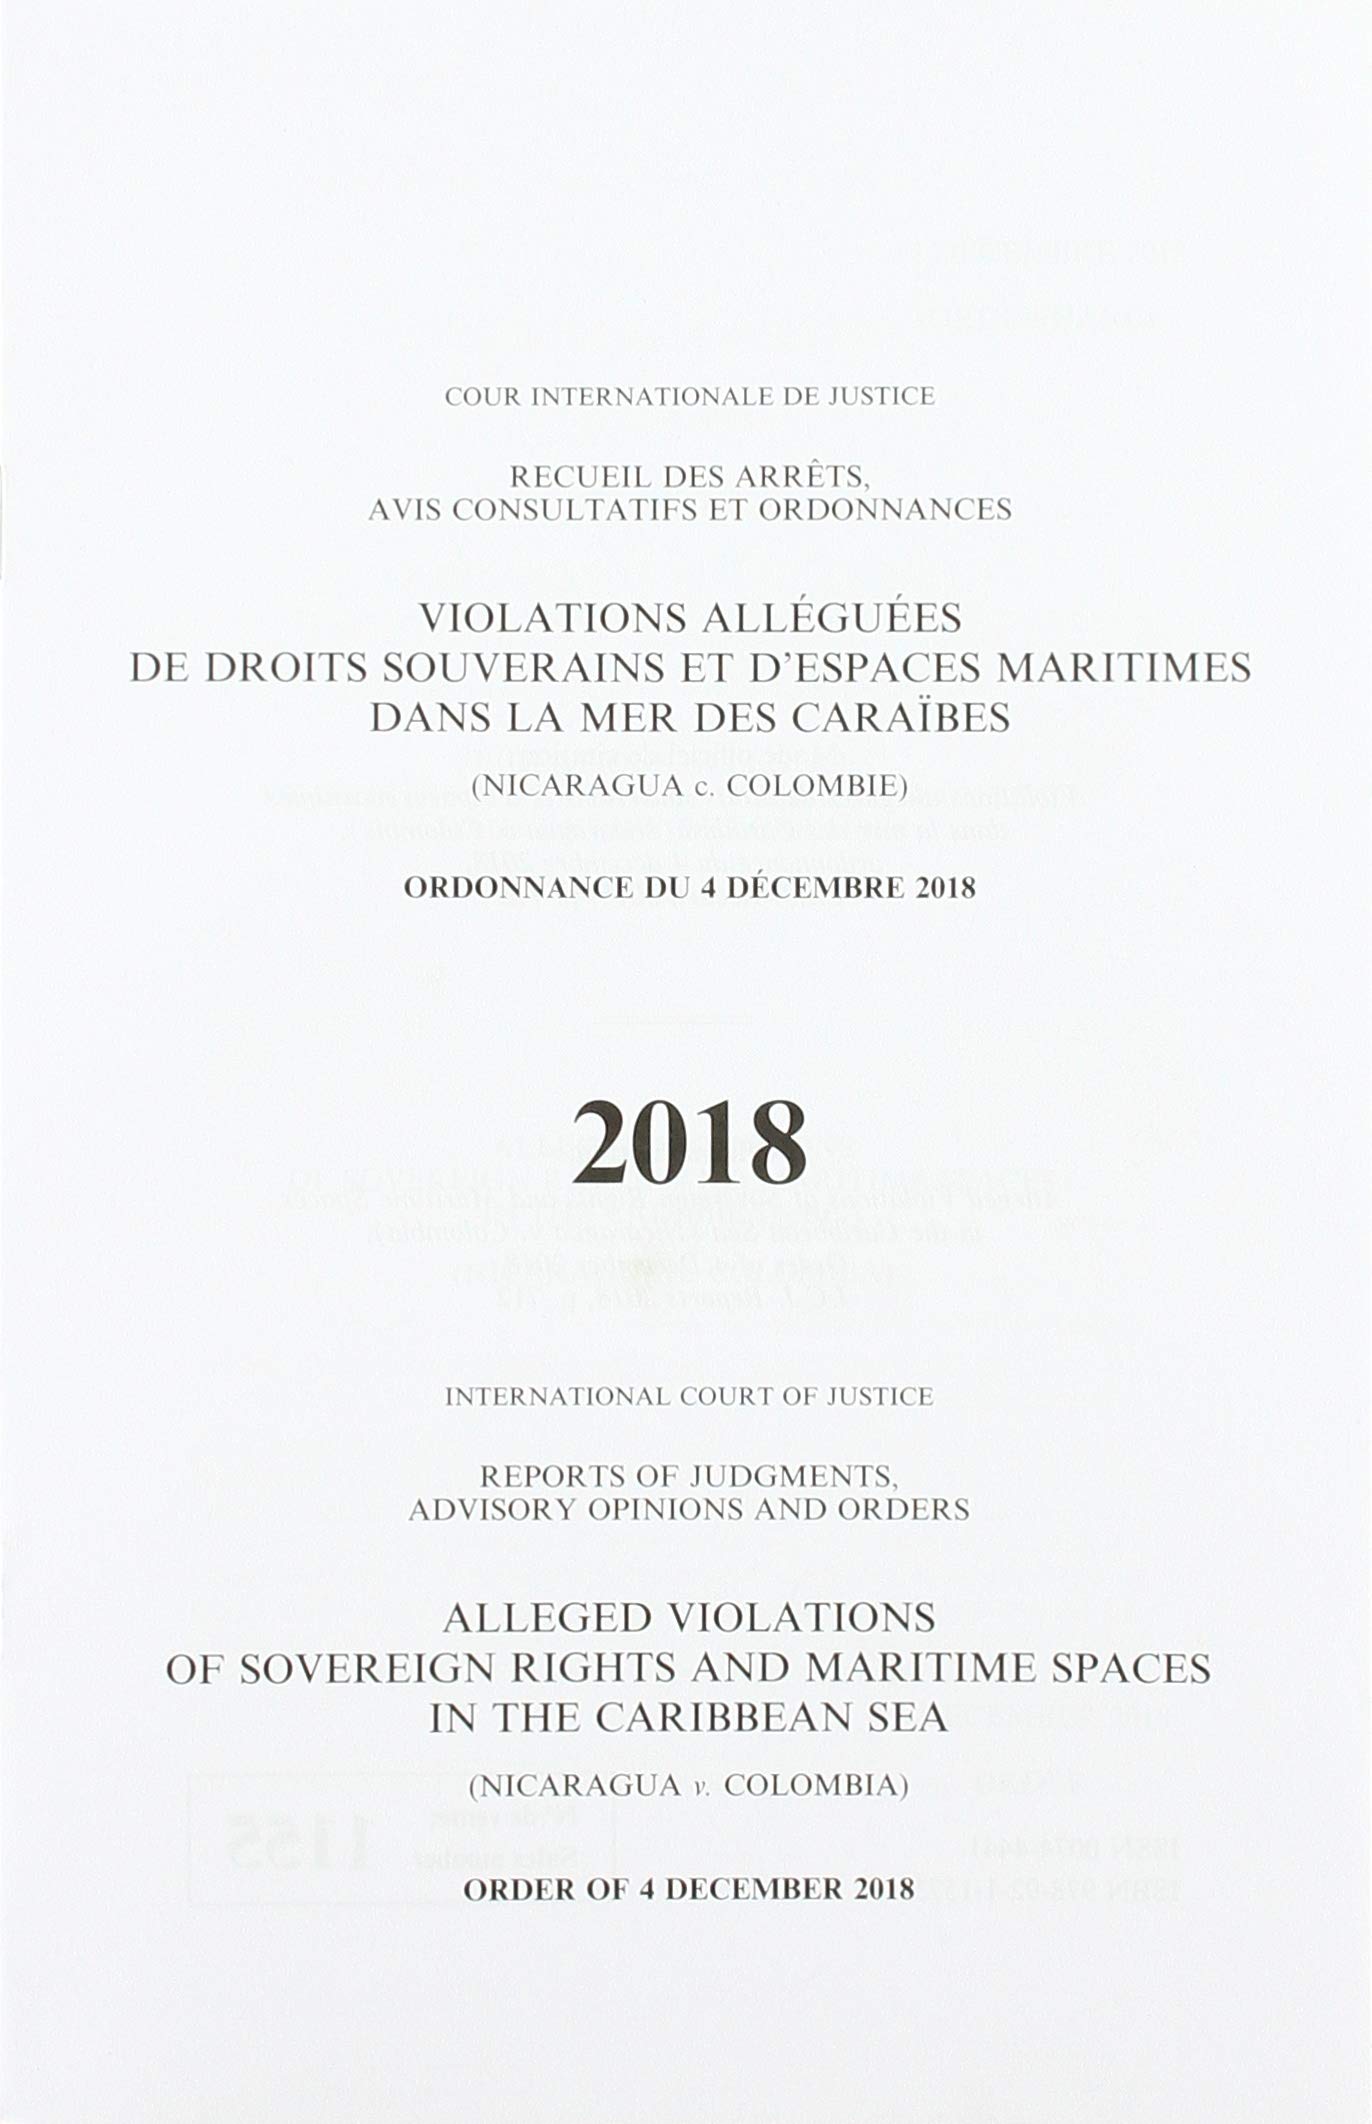 Alleged violations of sovereign rights and maritime spaces in the Caribbean Sea